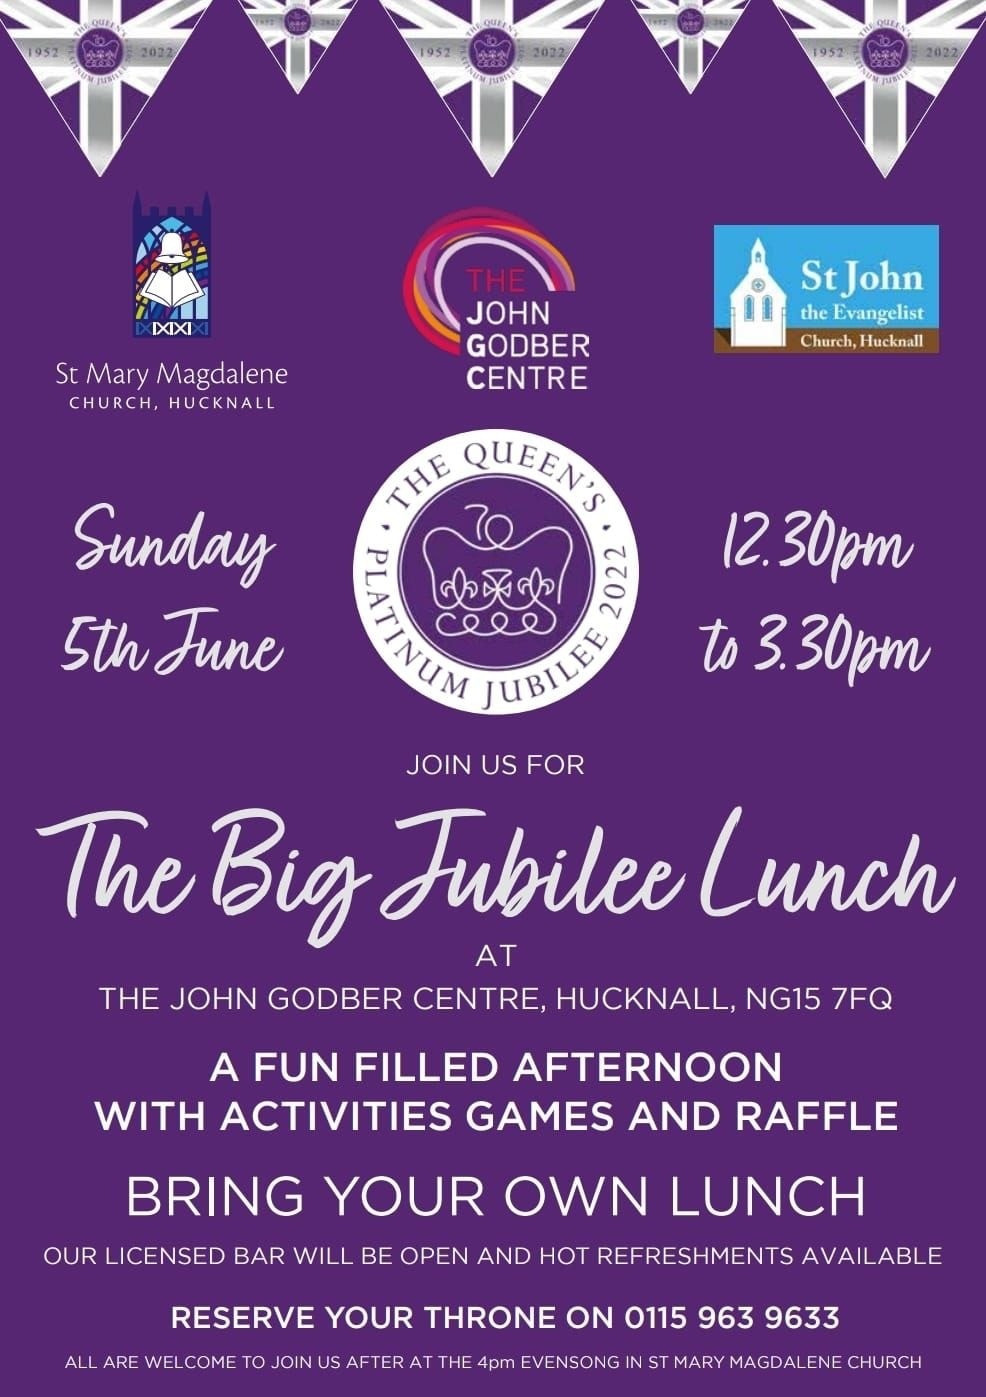 The Big Jubilee Lunch event poster